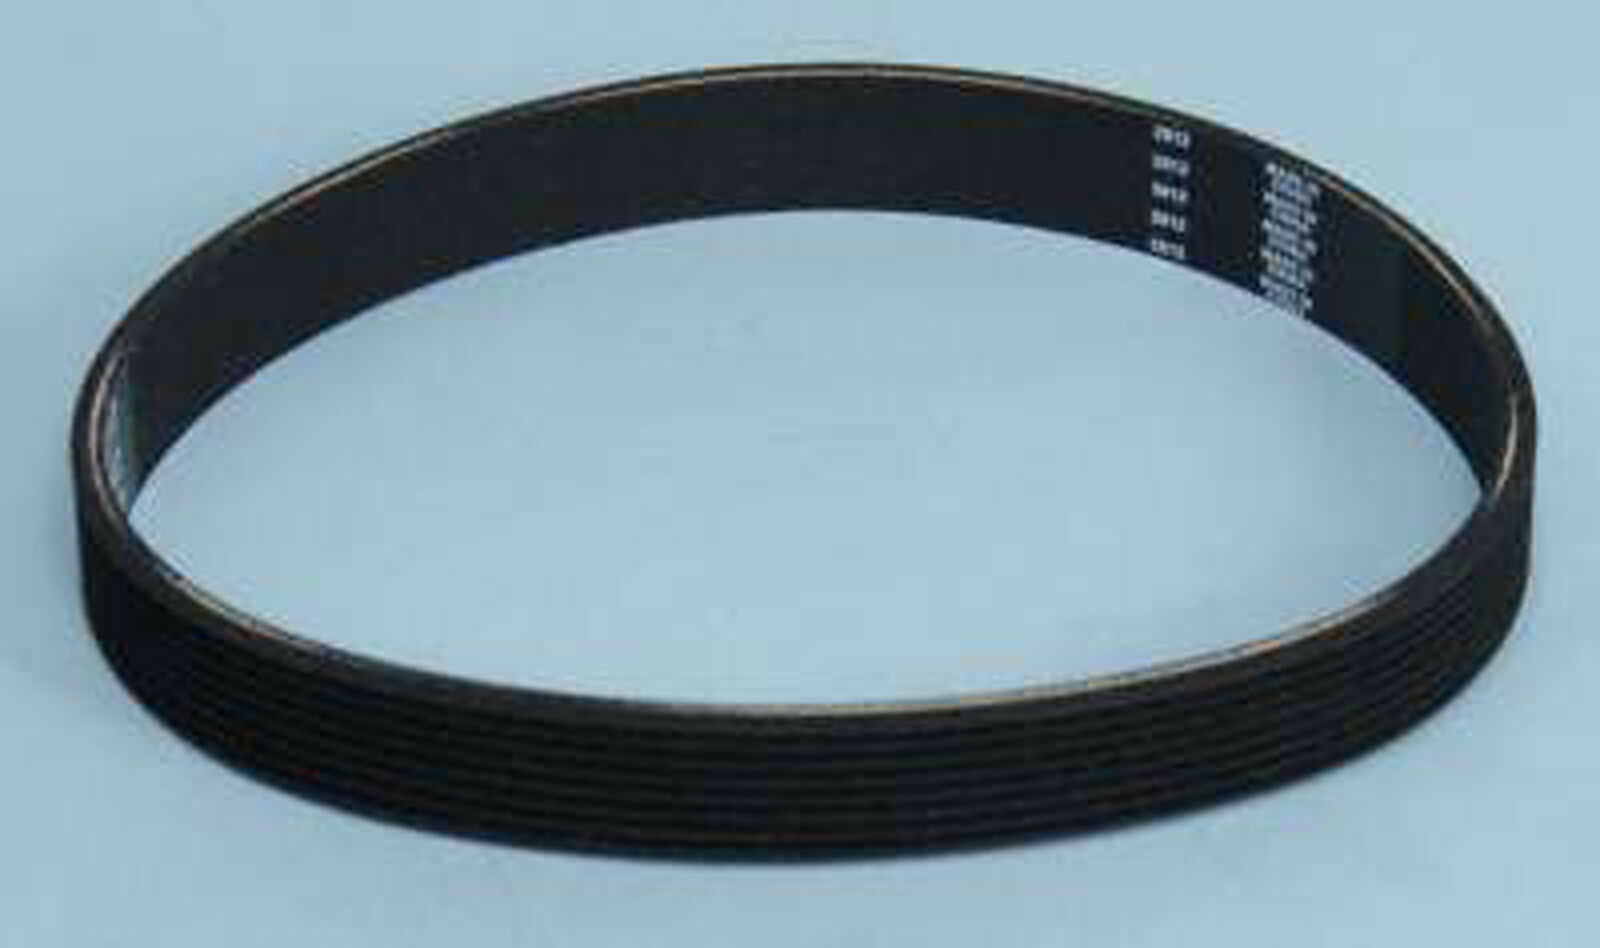 NEW Replacement BELT for use with Grizzly Bandsaw Model GO555LANV - $16.96